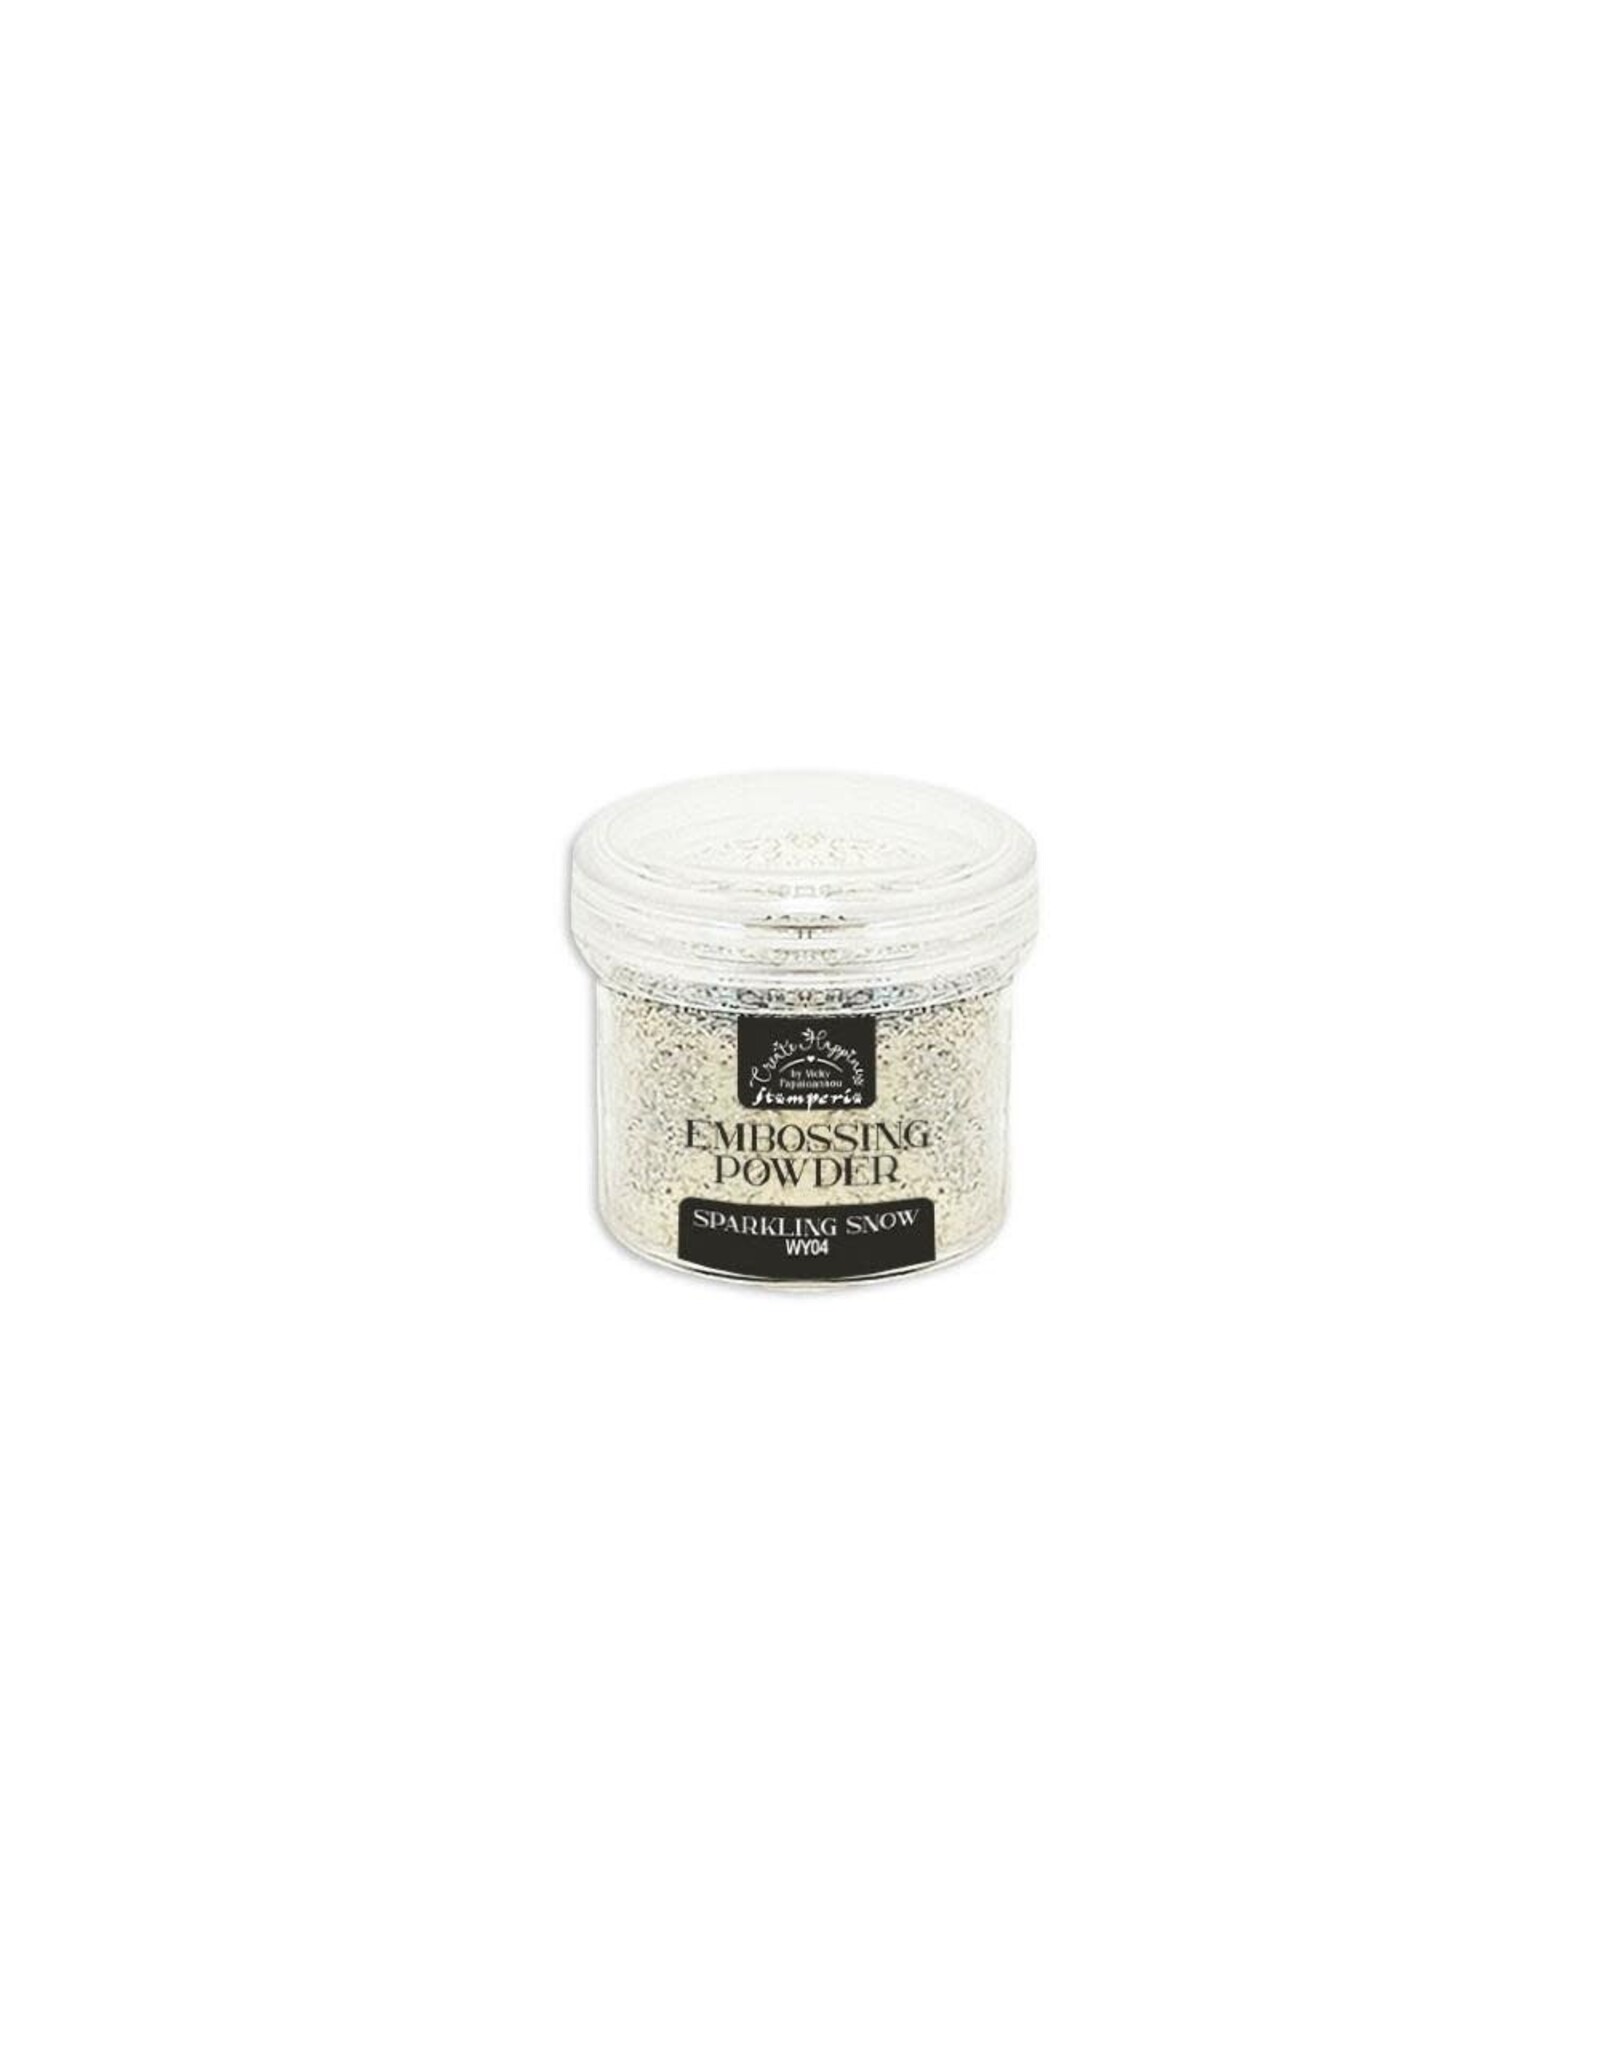 STAMPERIA STAMPERIA VICKY PAPAIOANNOU CREATE HAPPINESS SPARKLING SNOW EMBOSSING POWDER